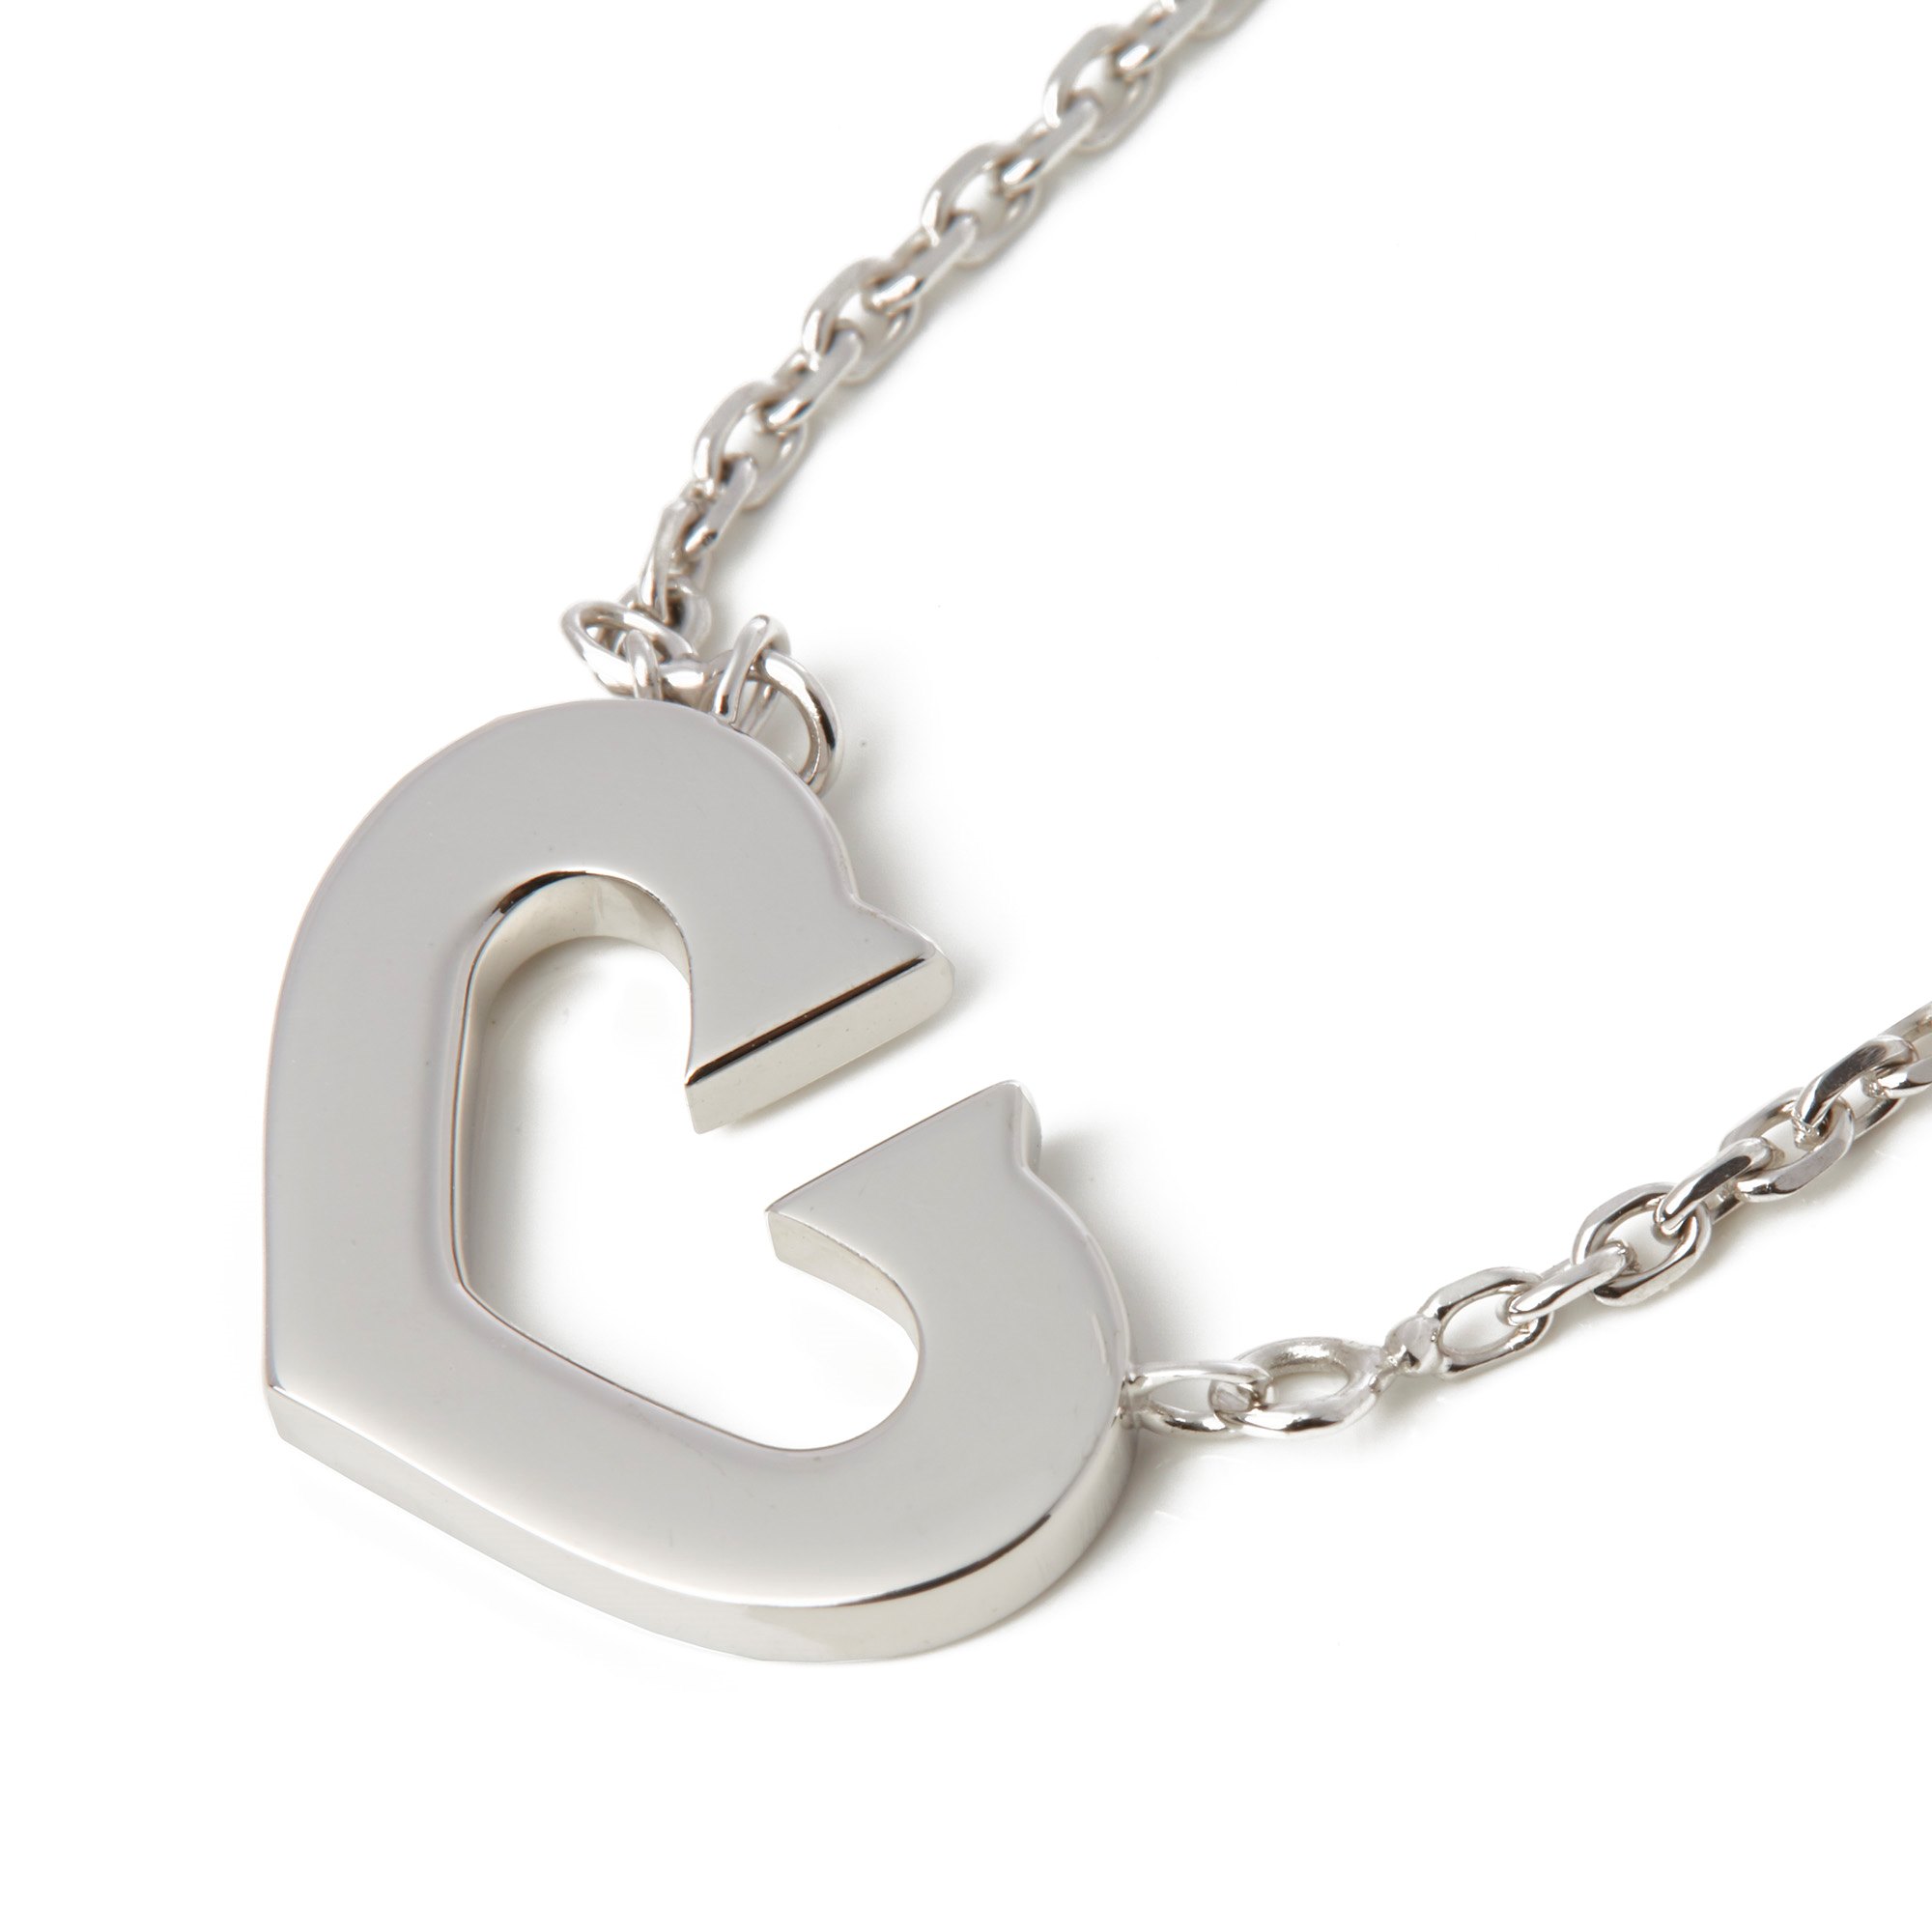 Cartier 18k White Gold Hearts and Symbols Necklet